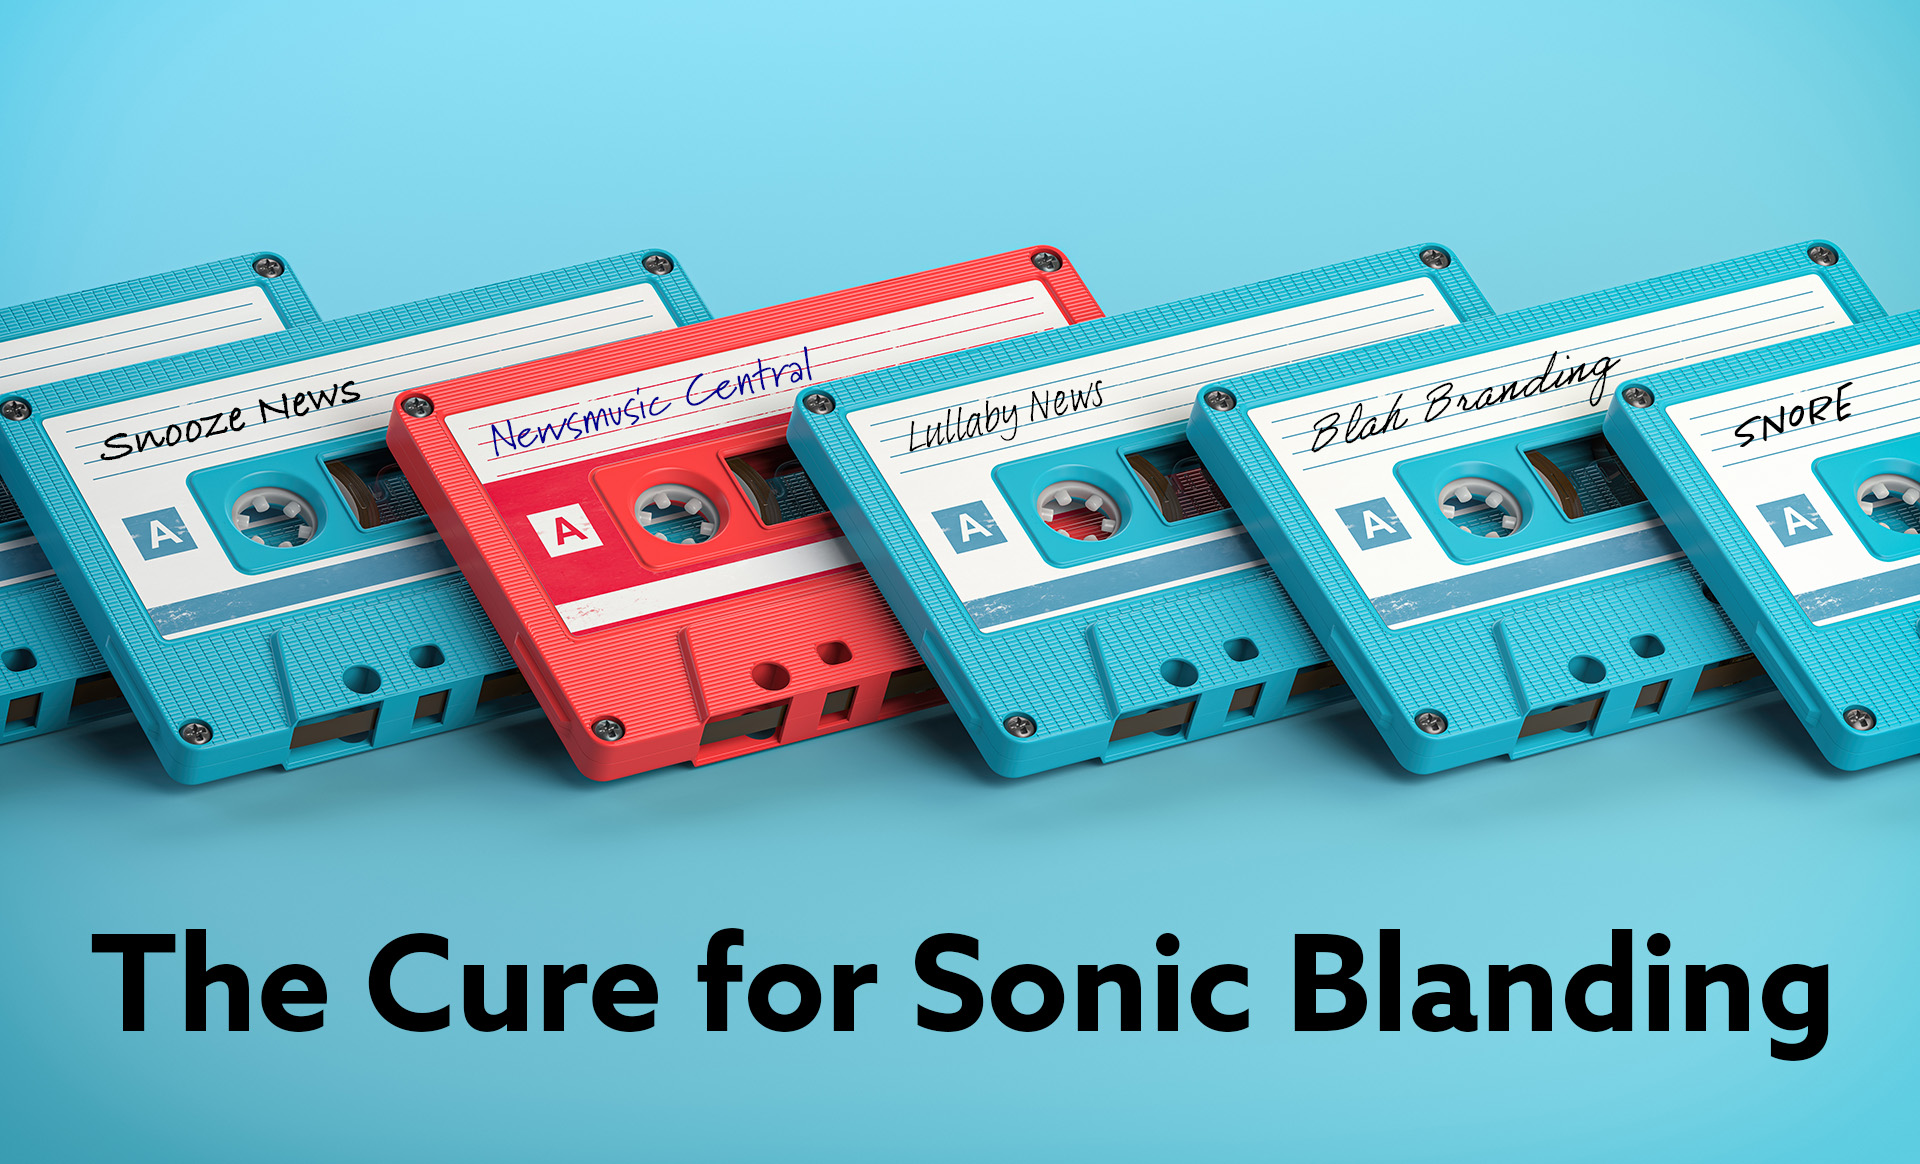 Newsmusic Central: The Cure for Sonic Blanding